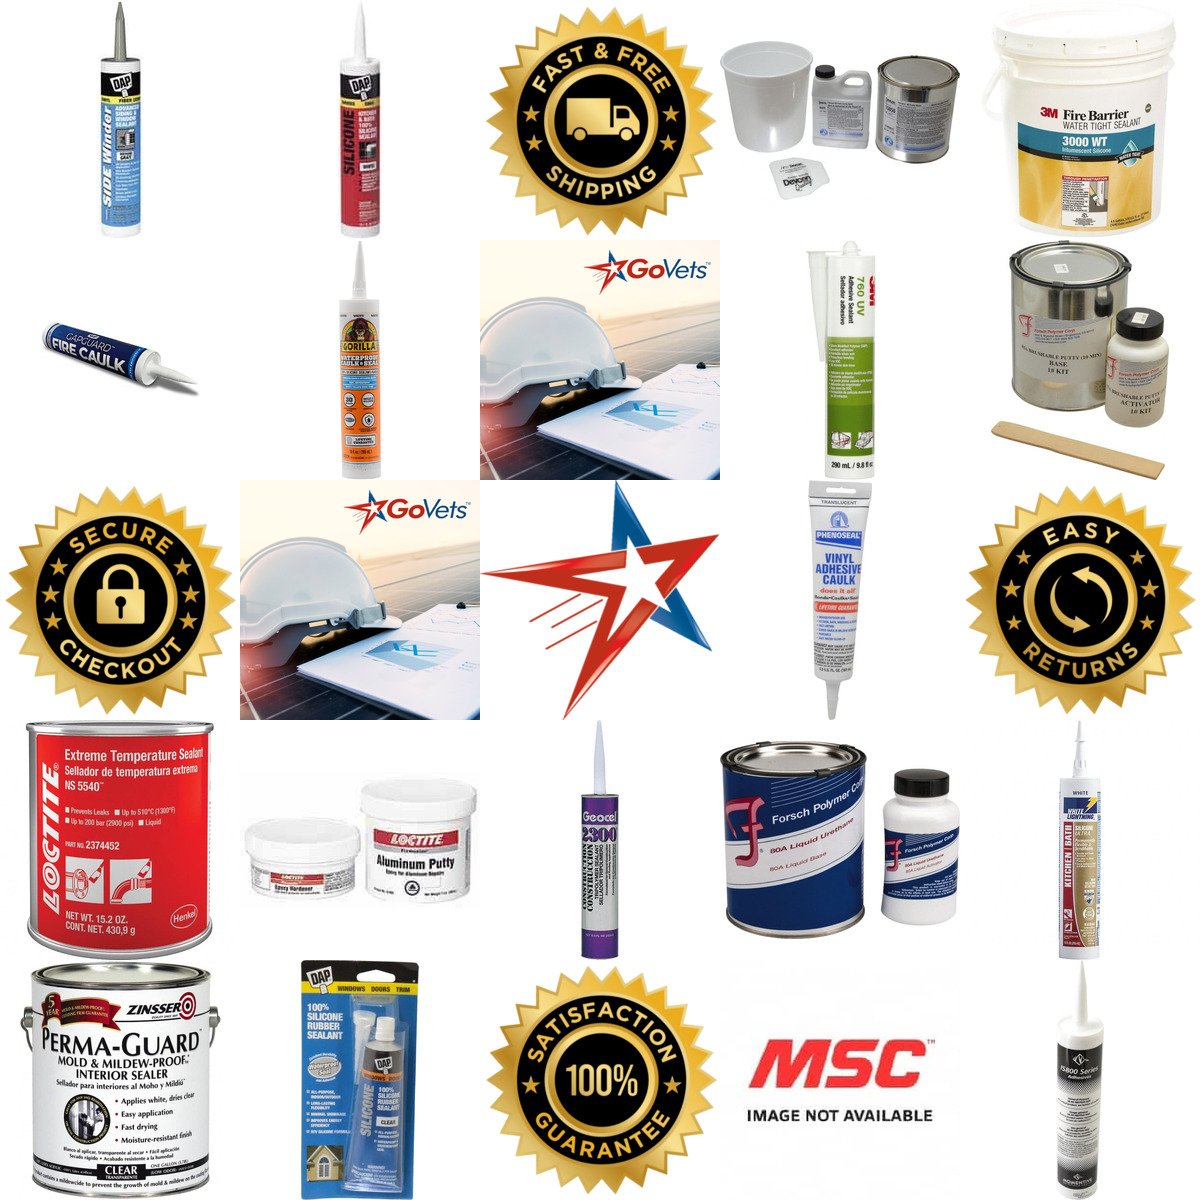 A selection of Caulk and Sealants products on GoVets